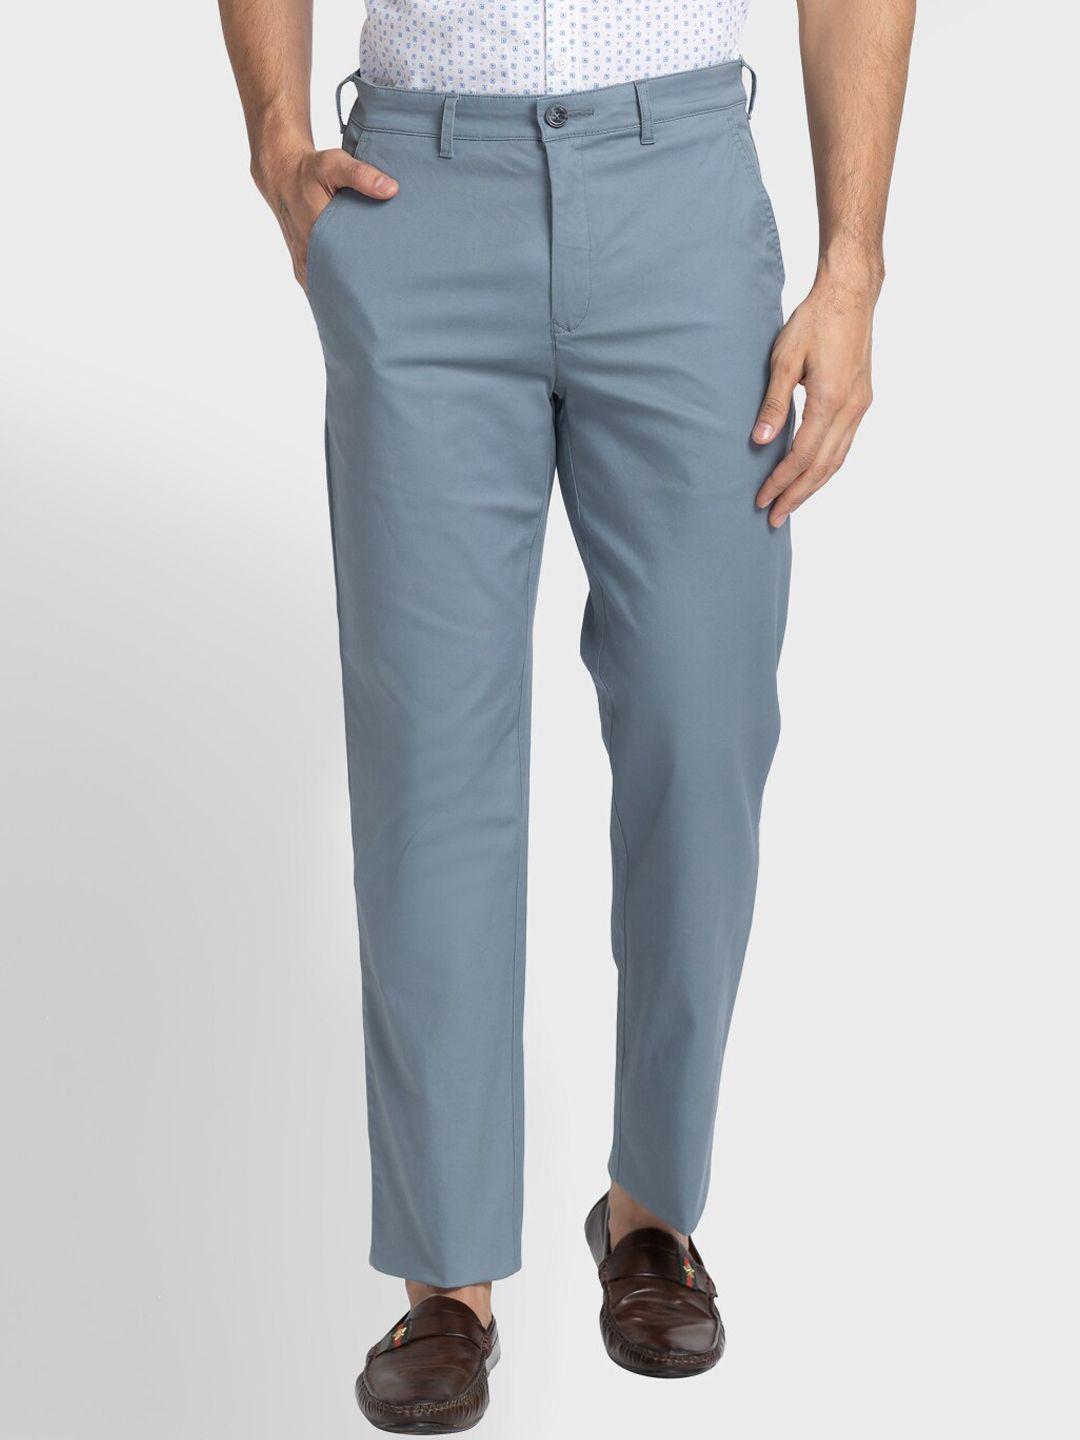 colorplus men grey chinos trousers